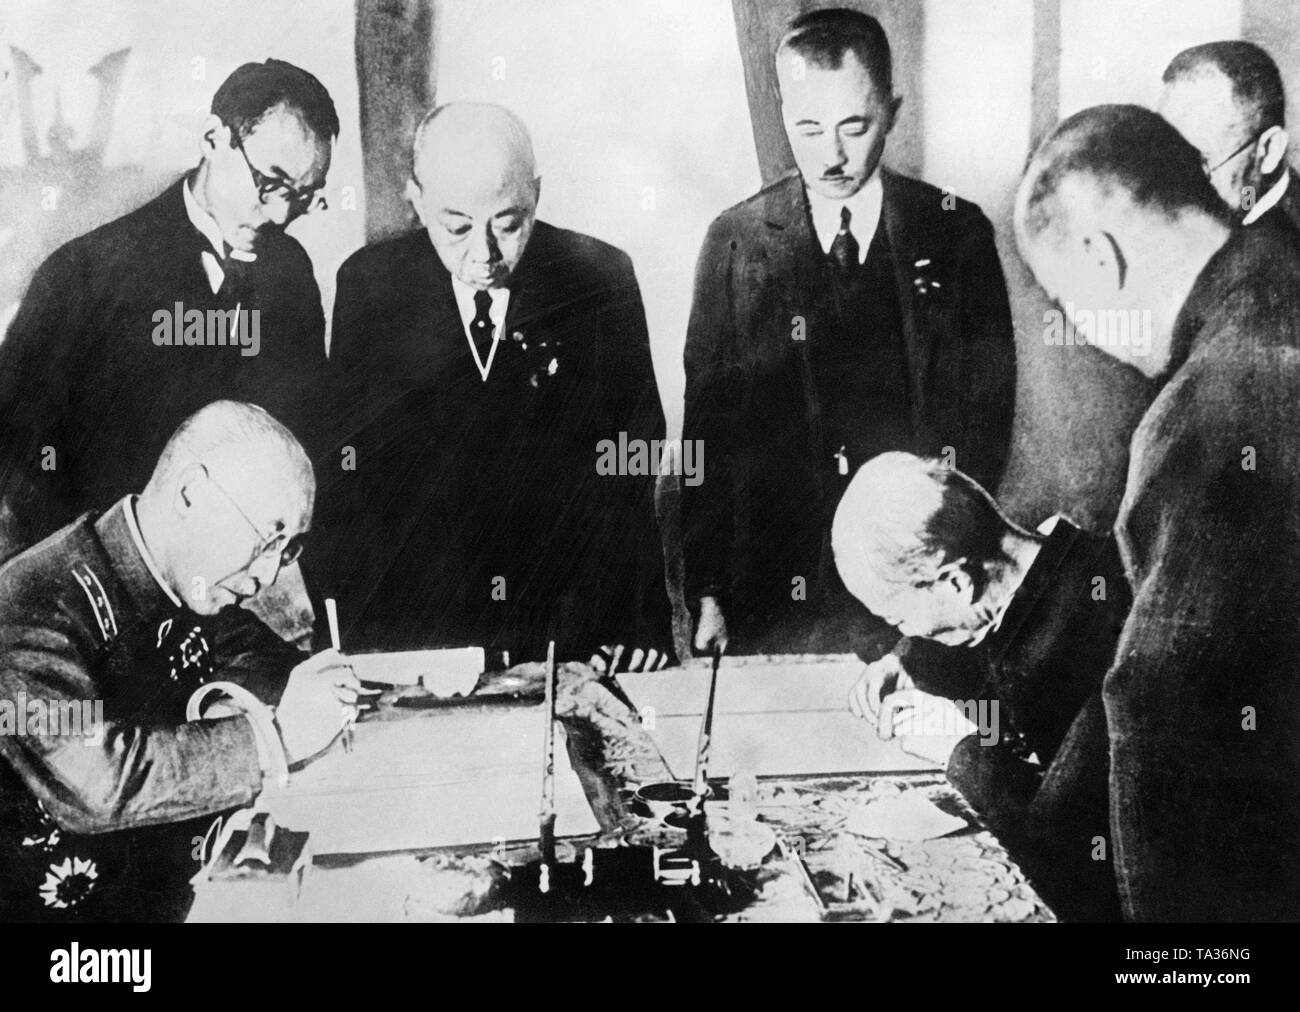 Representatives of the newly founded Manchukuo state and Japan sign a friendship treaty on October 6, 1932 in the capital of Manchukuo, Changchun. General Nobuyoshi Muto (left, sitting) represents Japan. Prime Minister Zheng Xiaoxu standing in the middle) and Foreign Minister Xie Jieshi (Hsi Tschei Shi) (right, sitting) are present as representatives of Manchukuo. Stock Photo